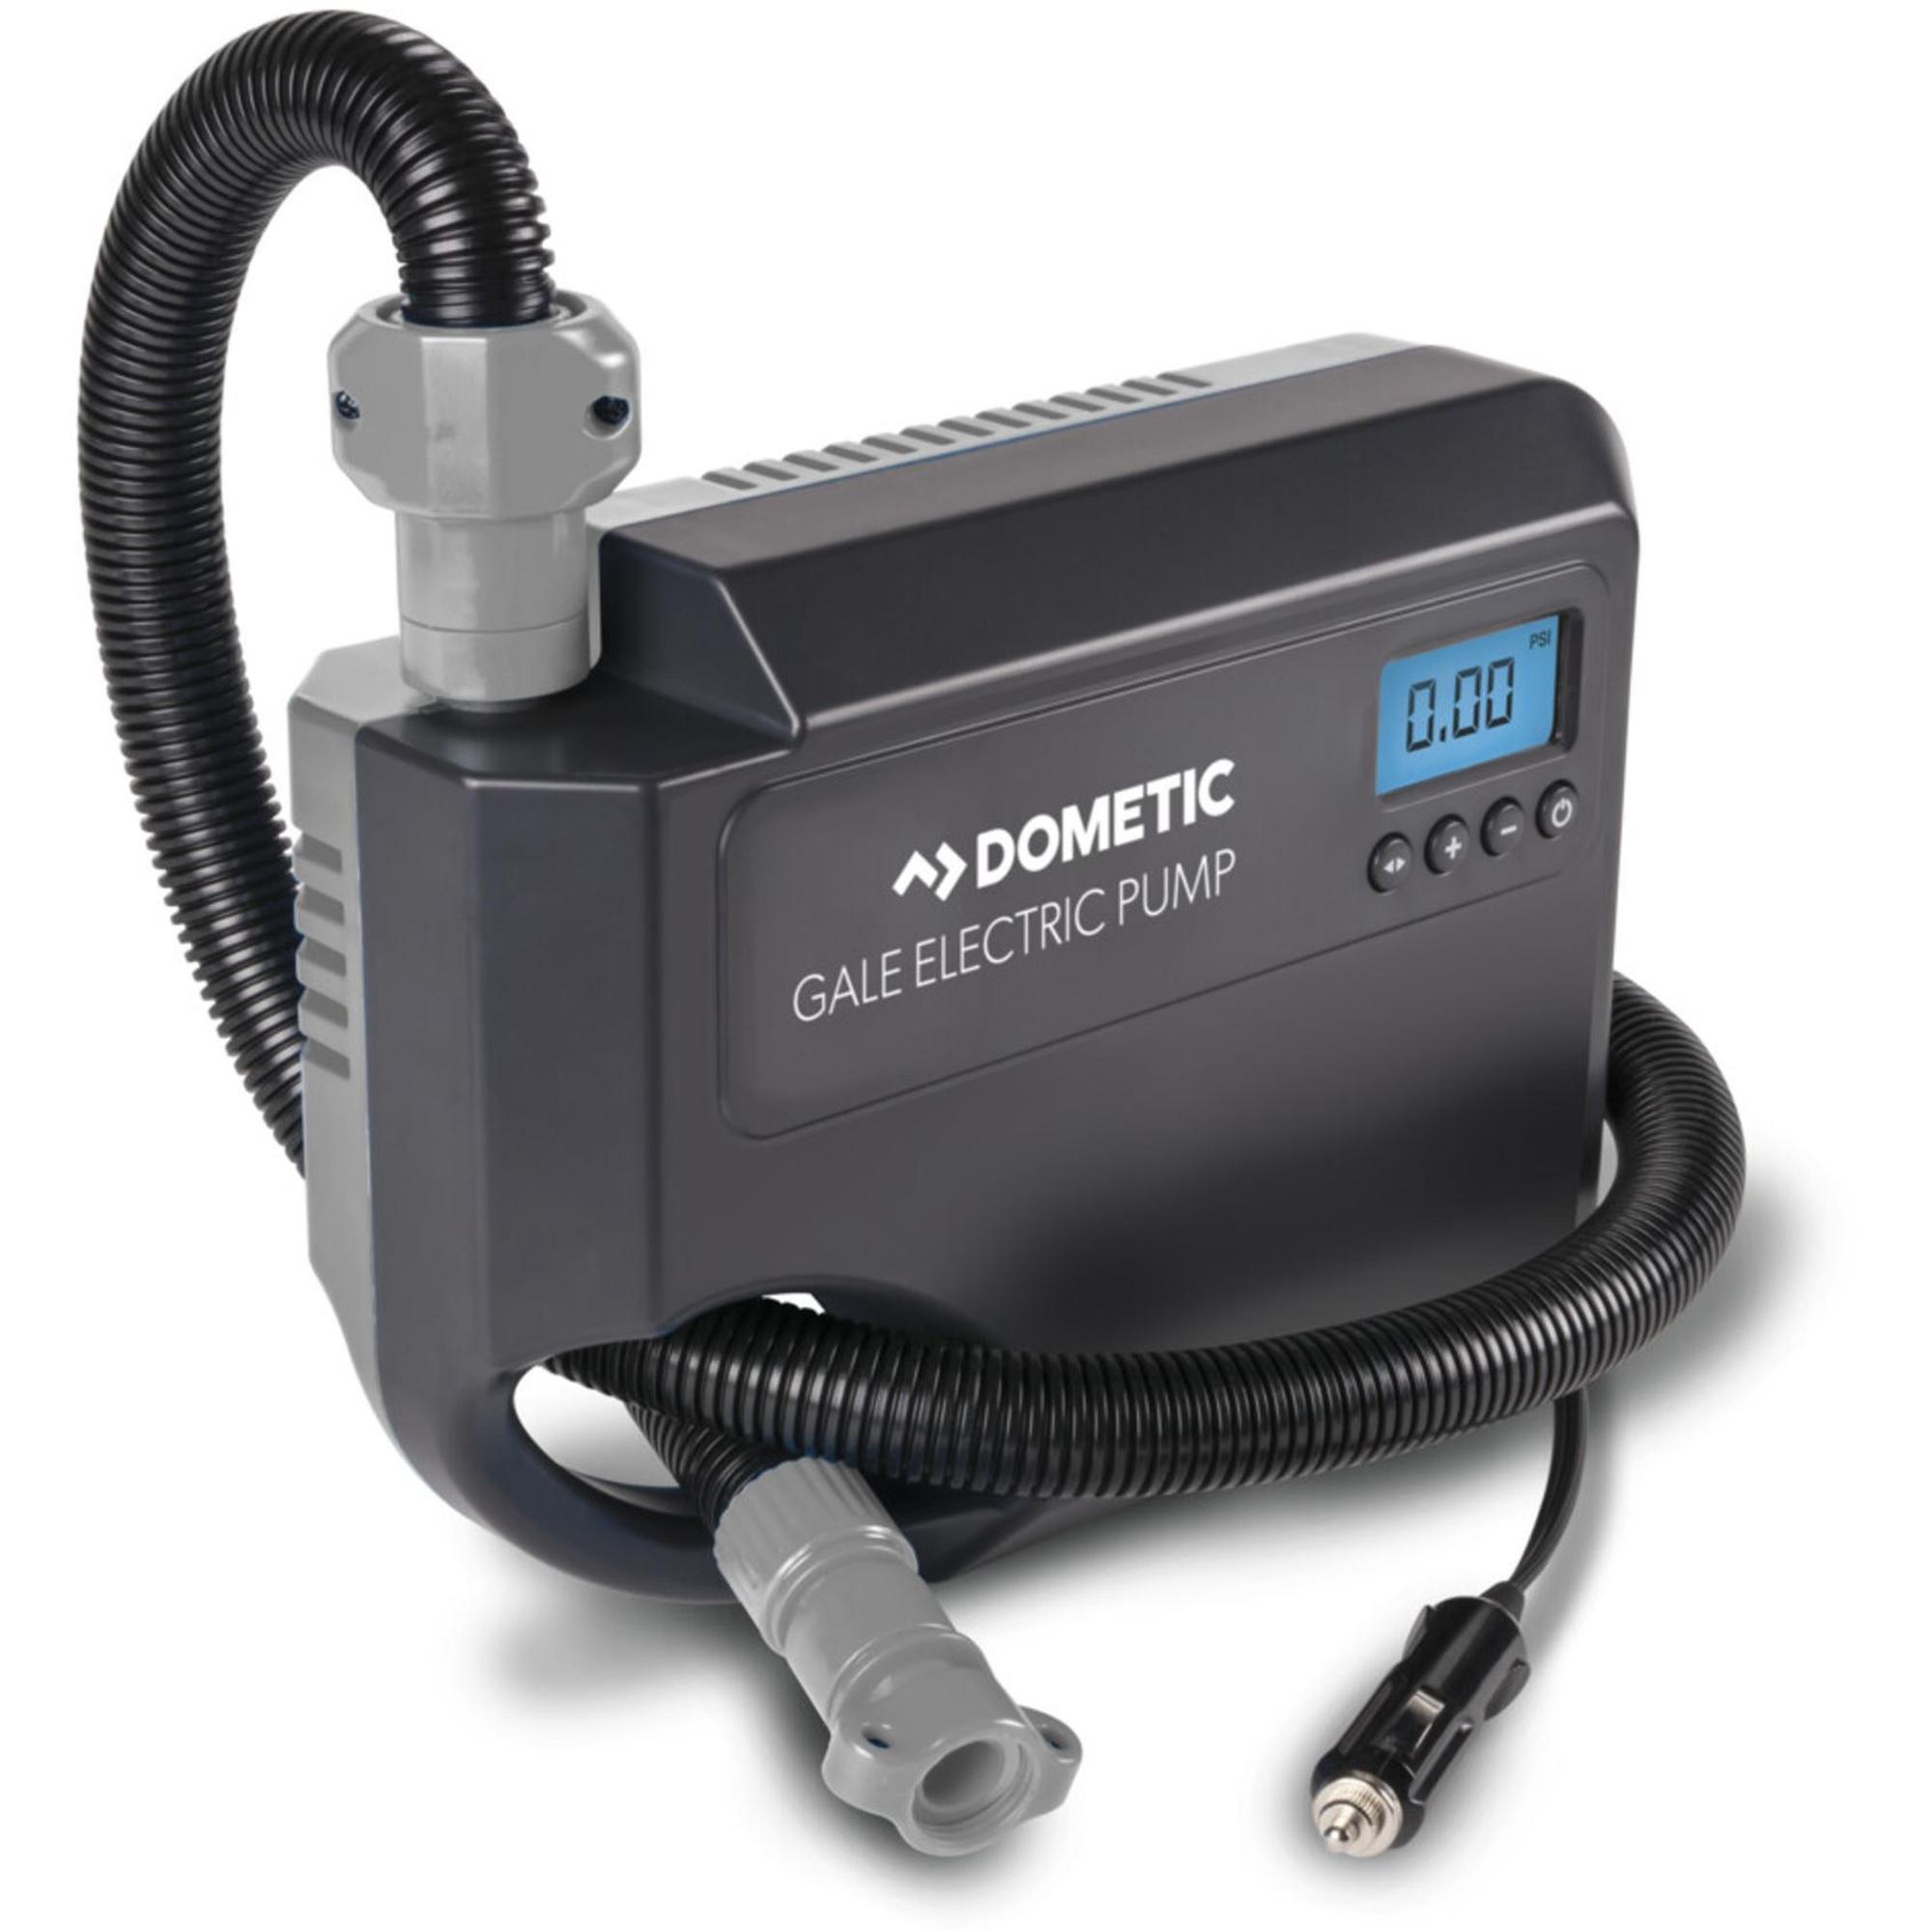 DOMETIC Dometic Gale Electric Pump 12V for Tents & Awnings